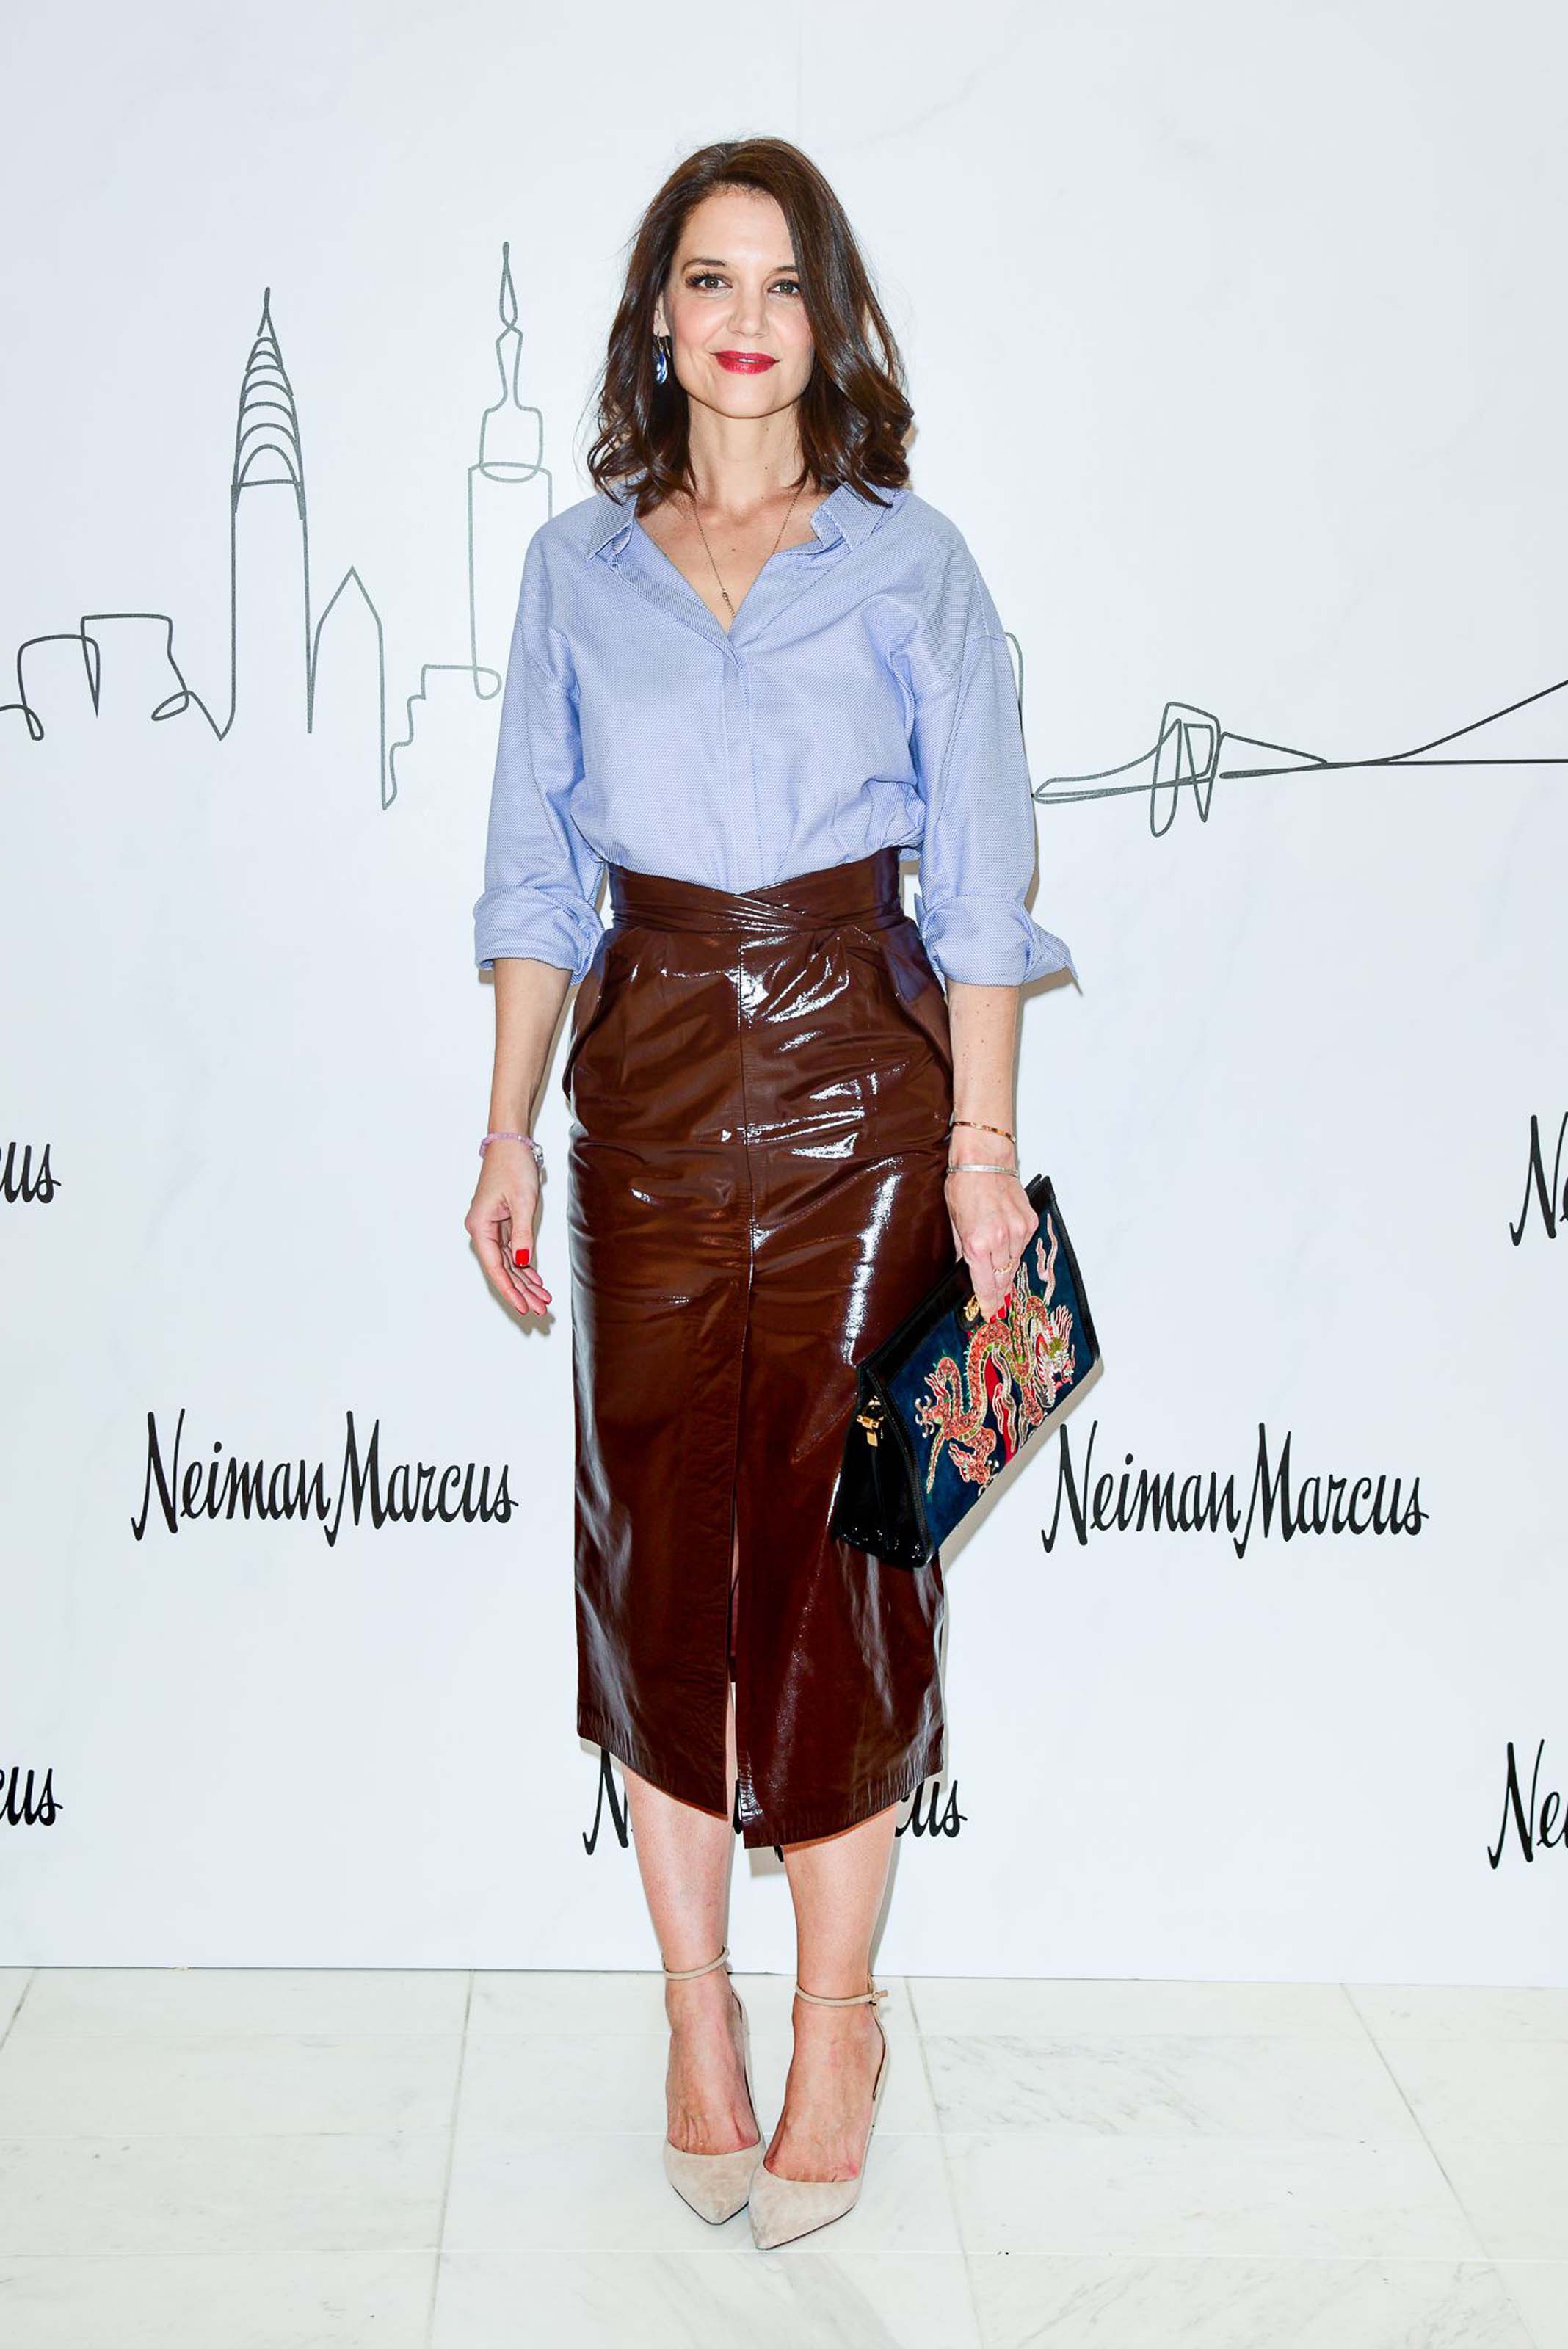 Katie Holmes attends Neiman Marcus Hudson Yards Party